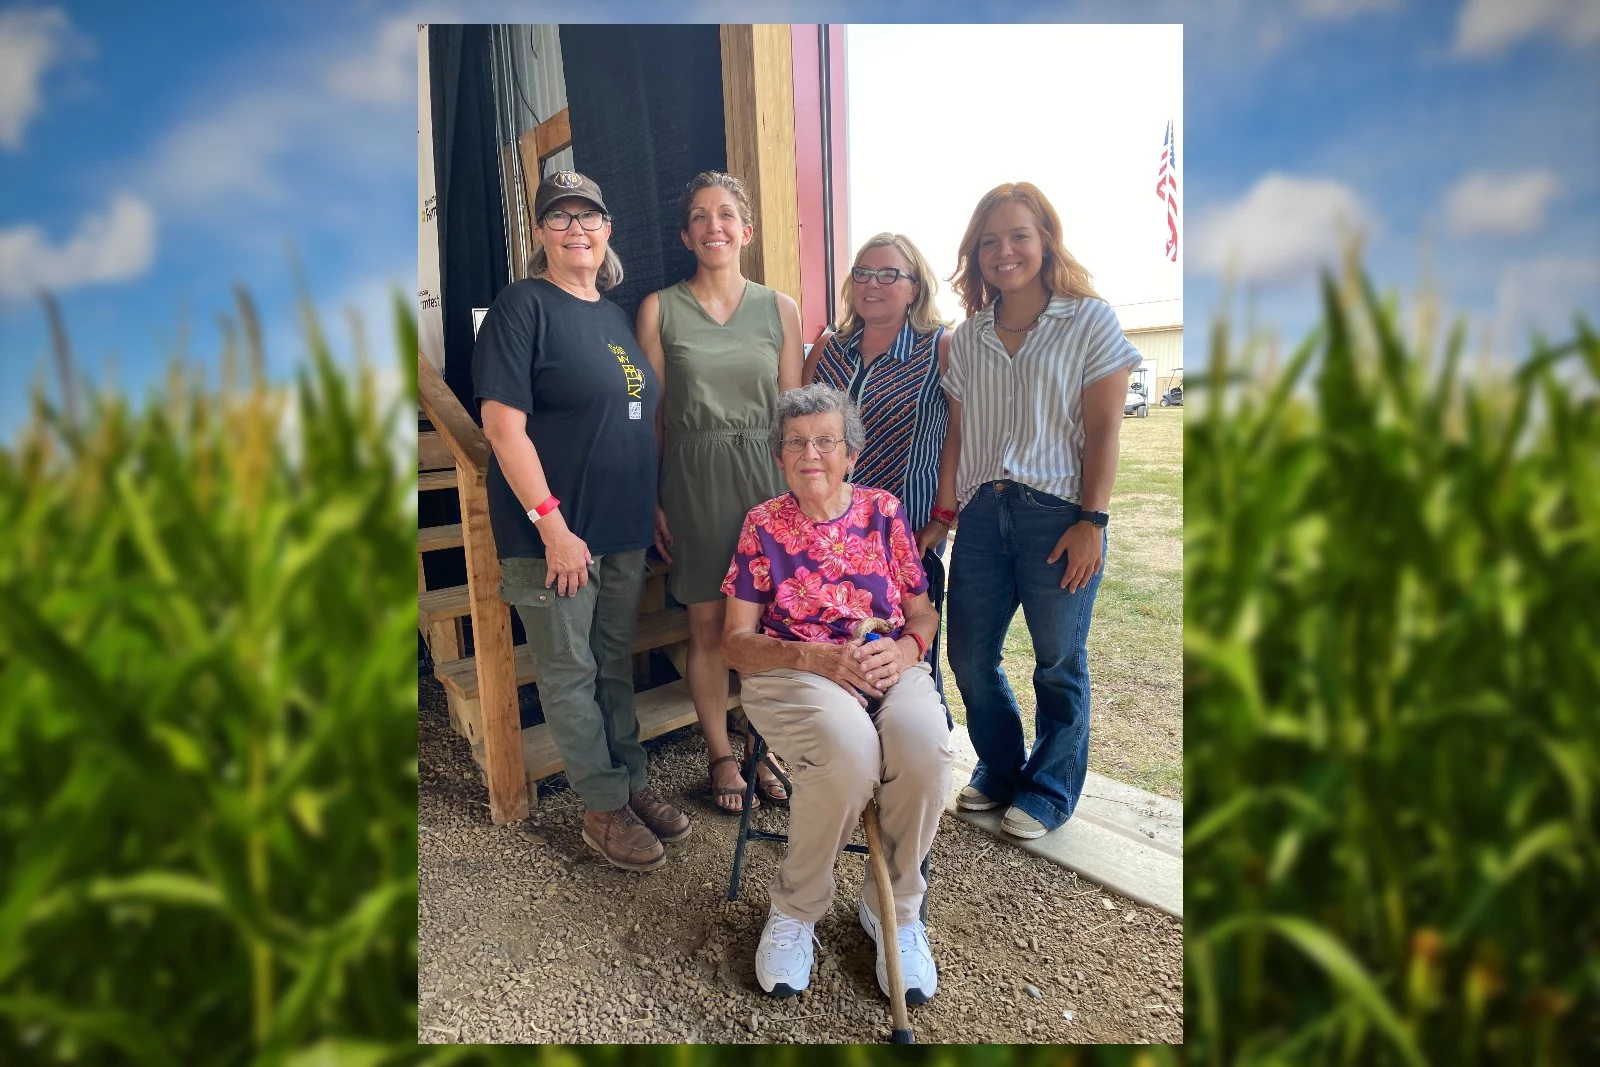 Nominations Open for FarmFest Woman Farmer of the Year